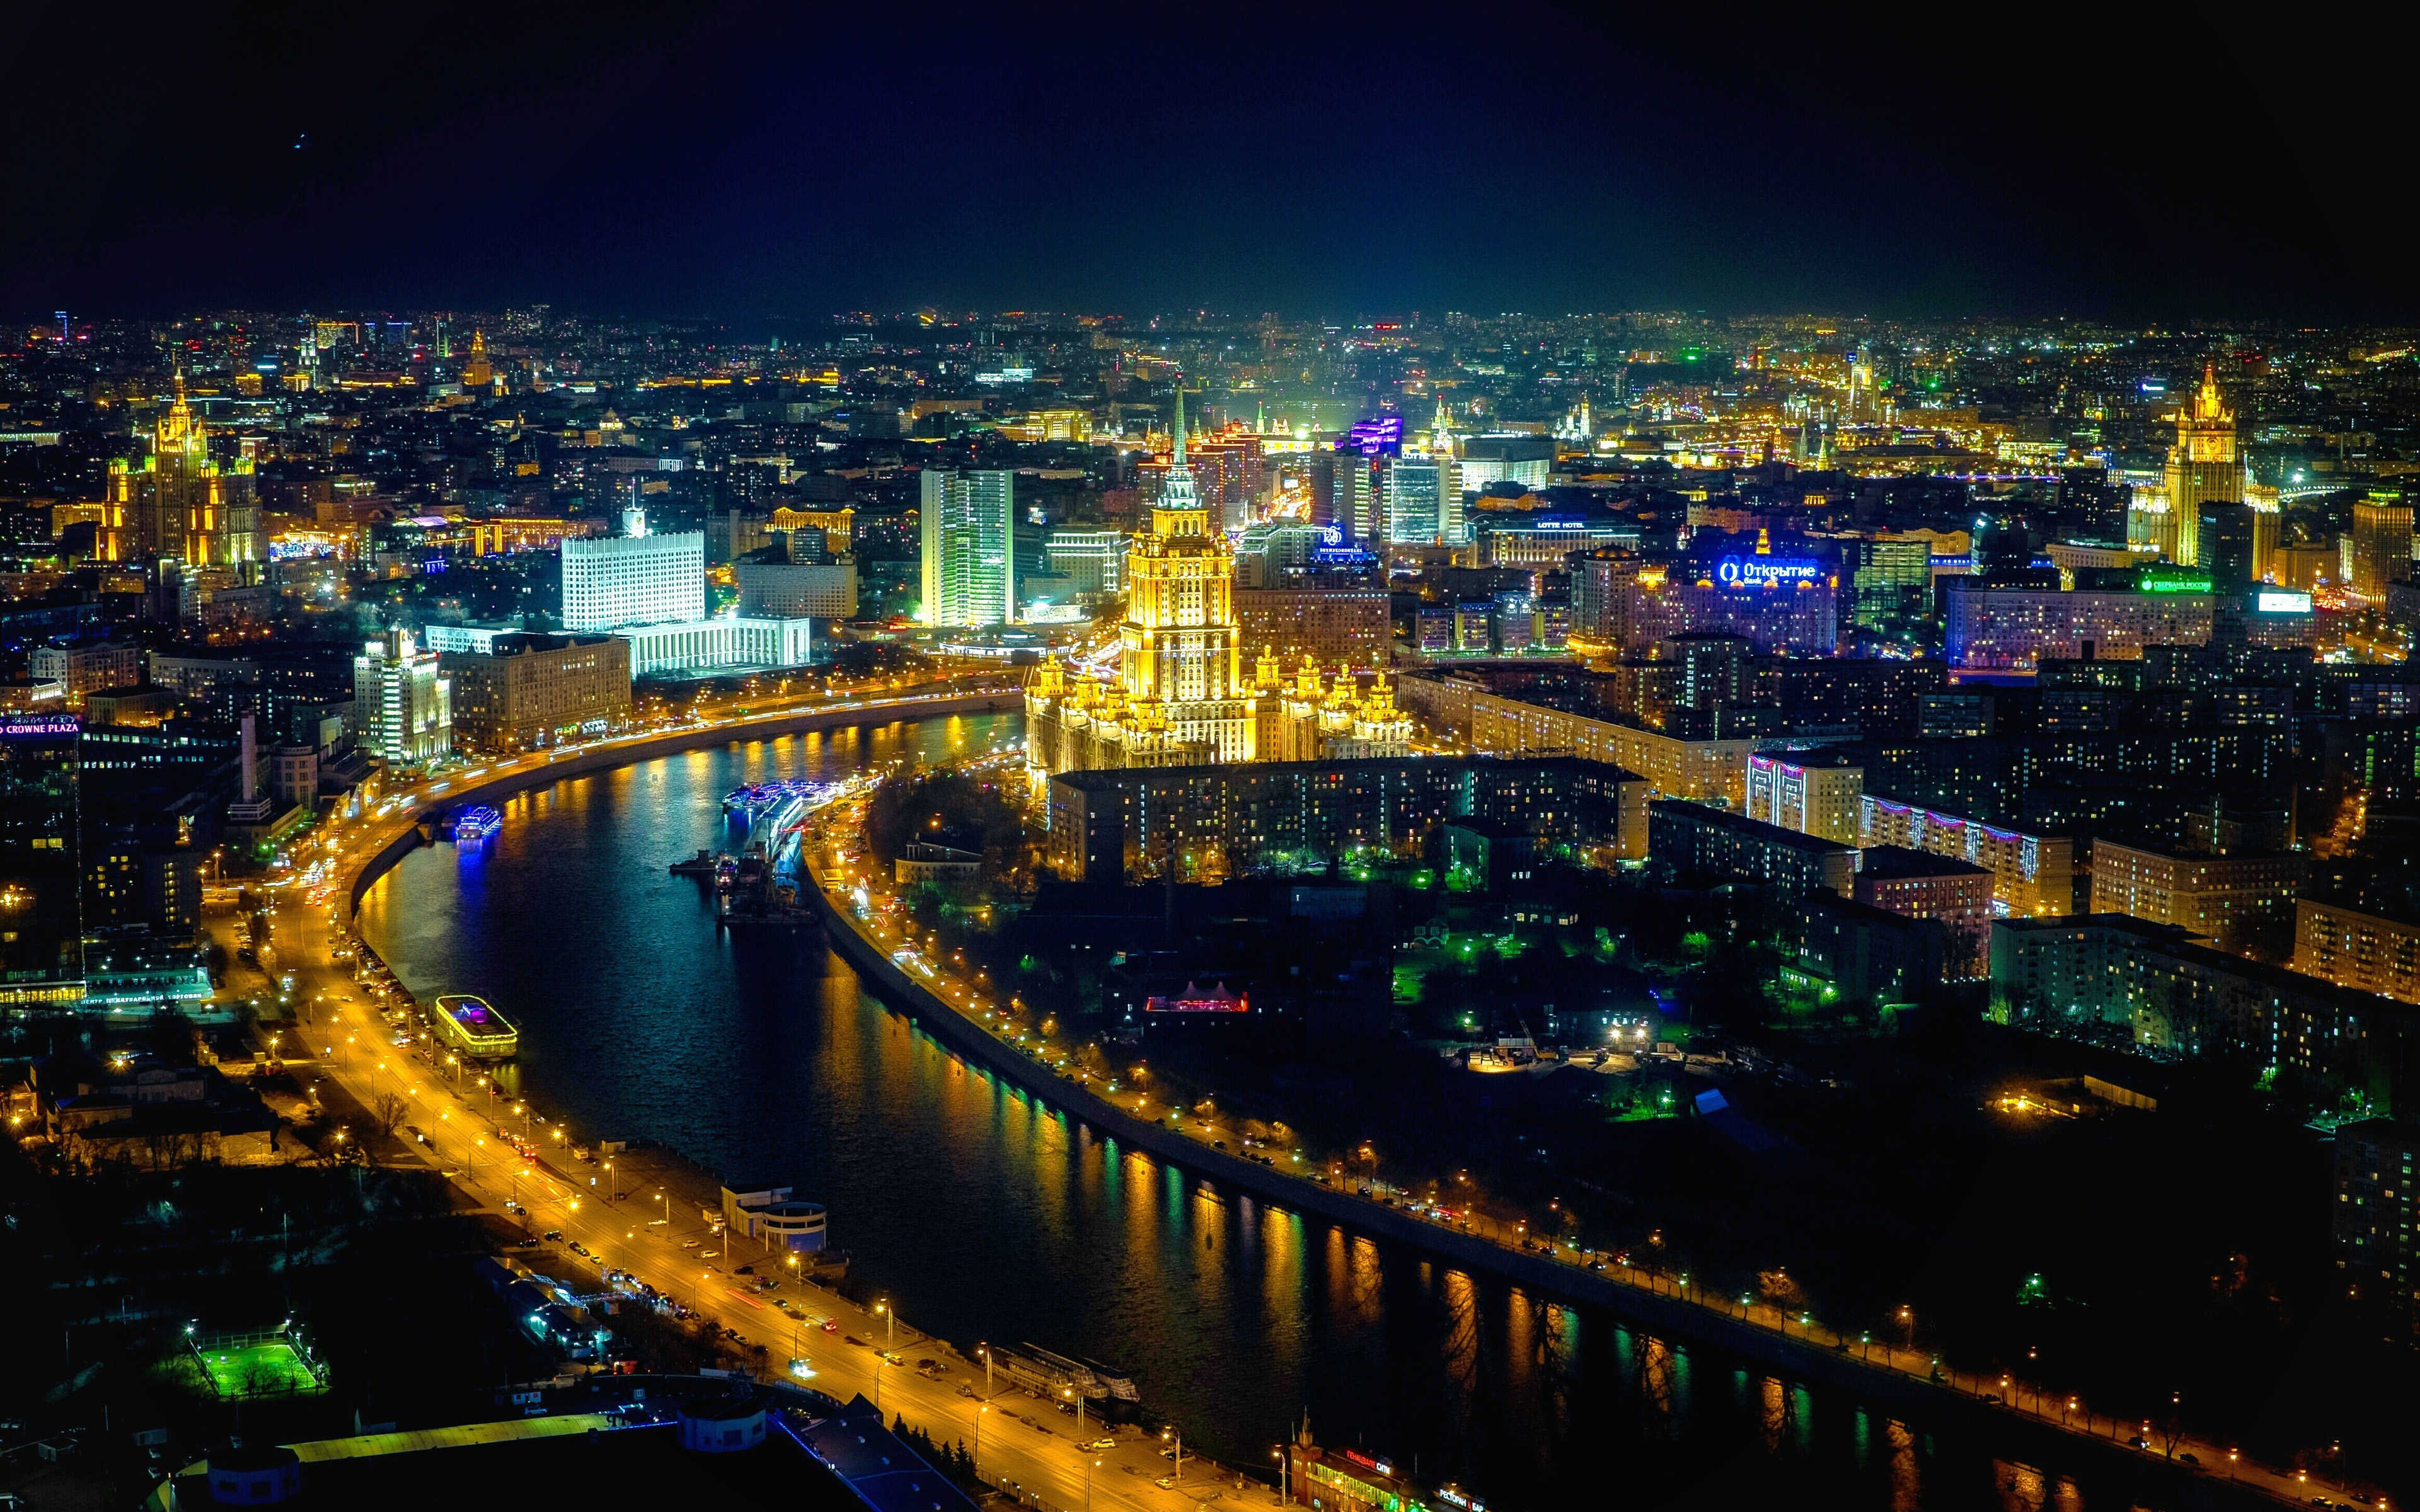 Download wallpapers Moscow at night, 4k, Russia, nightscapes, Moscow ...